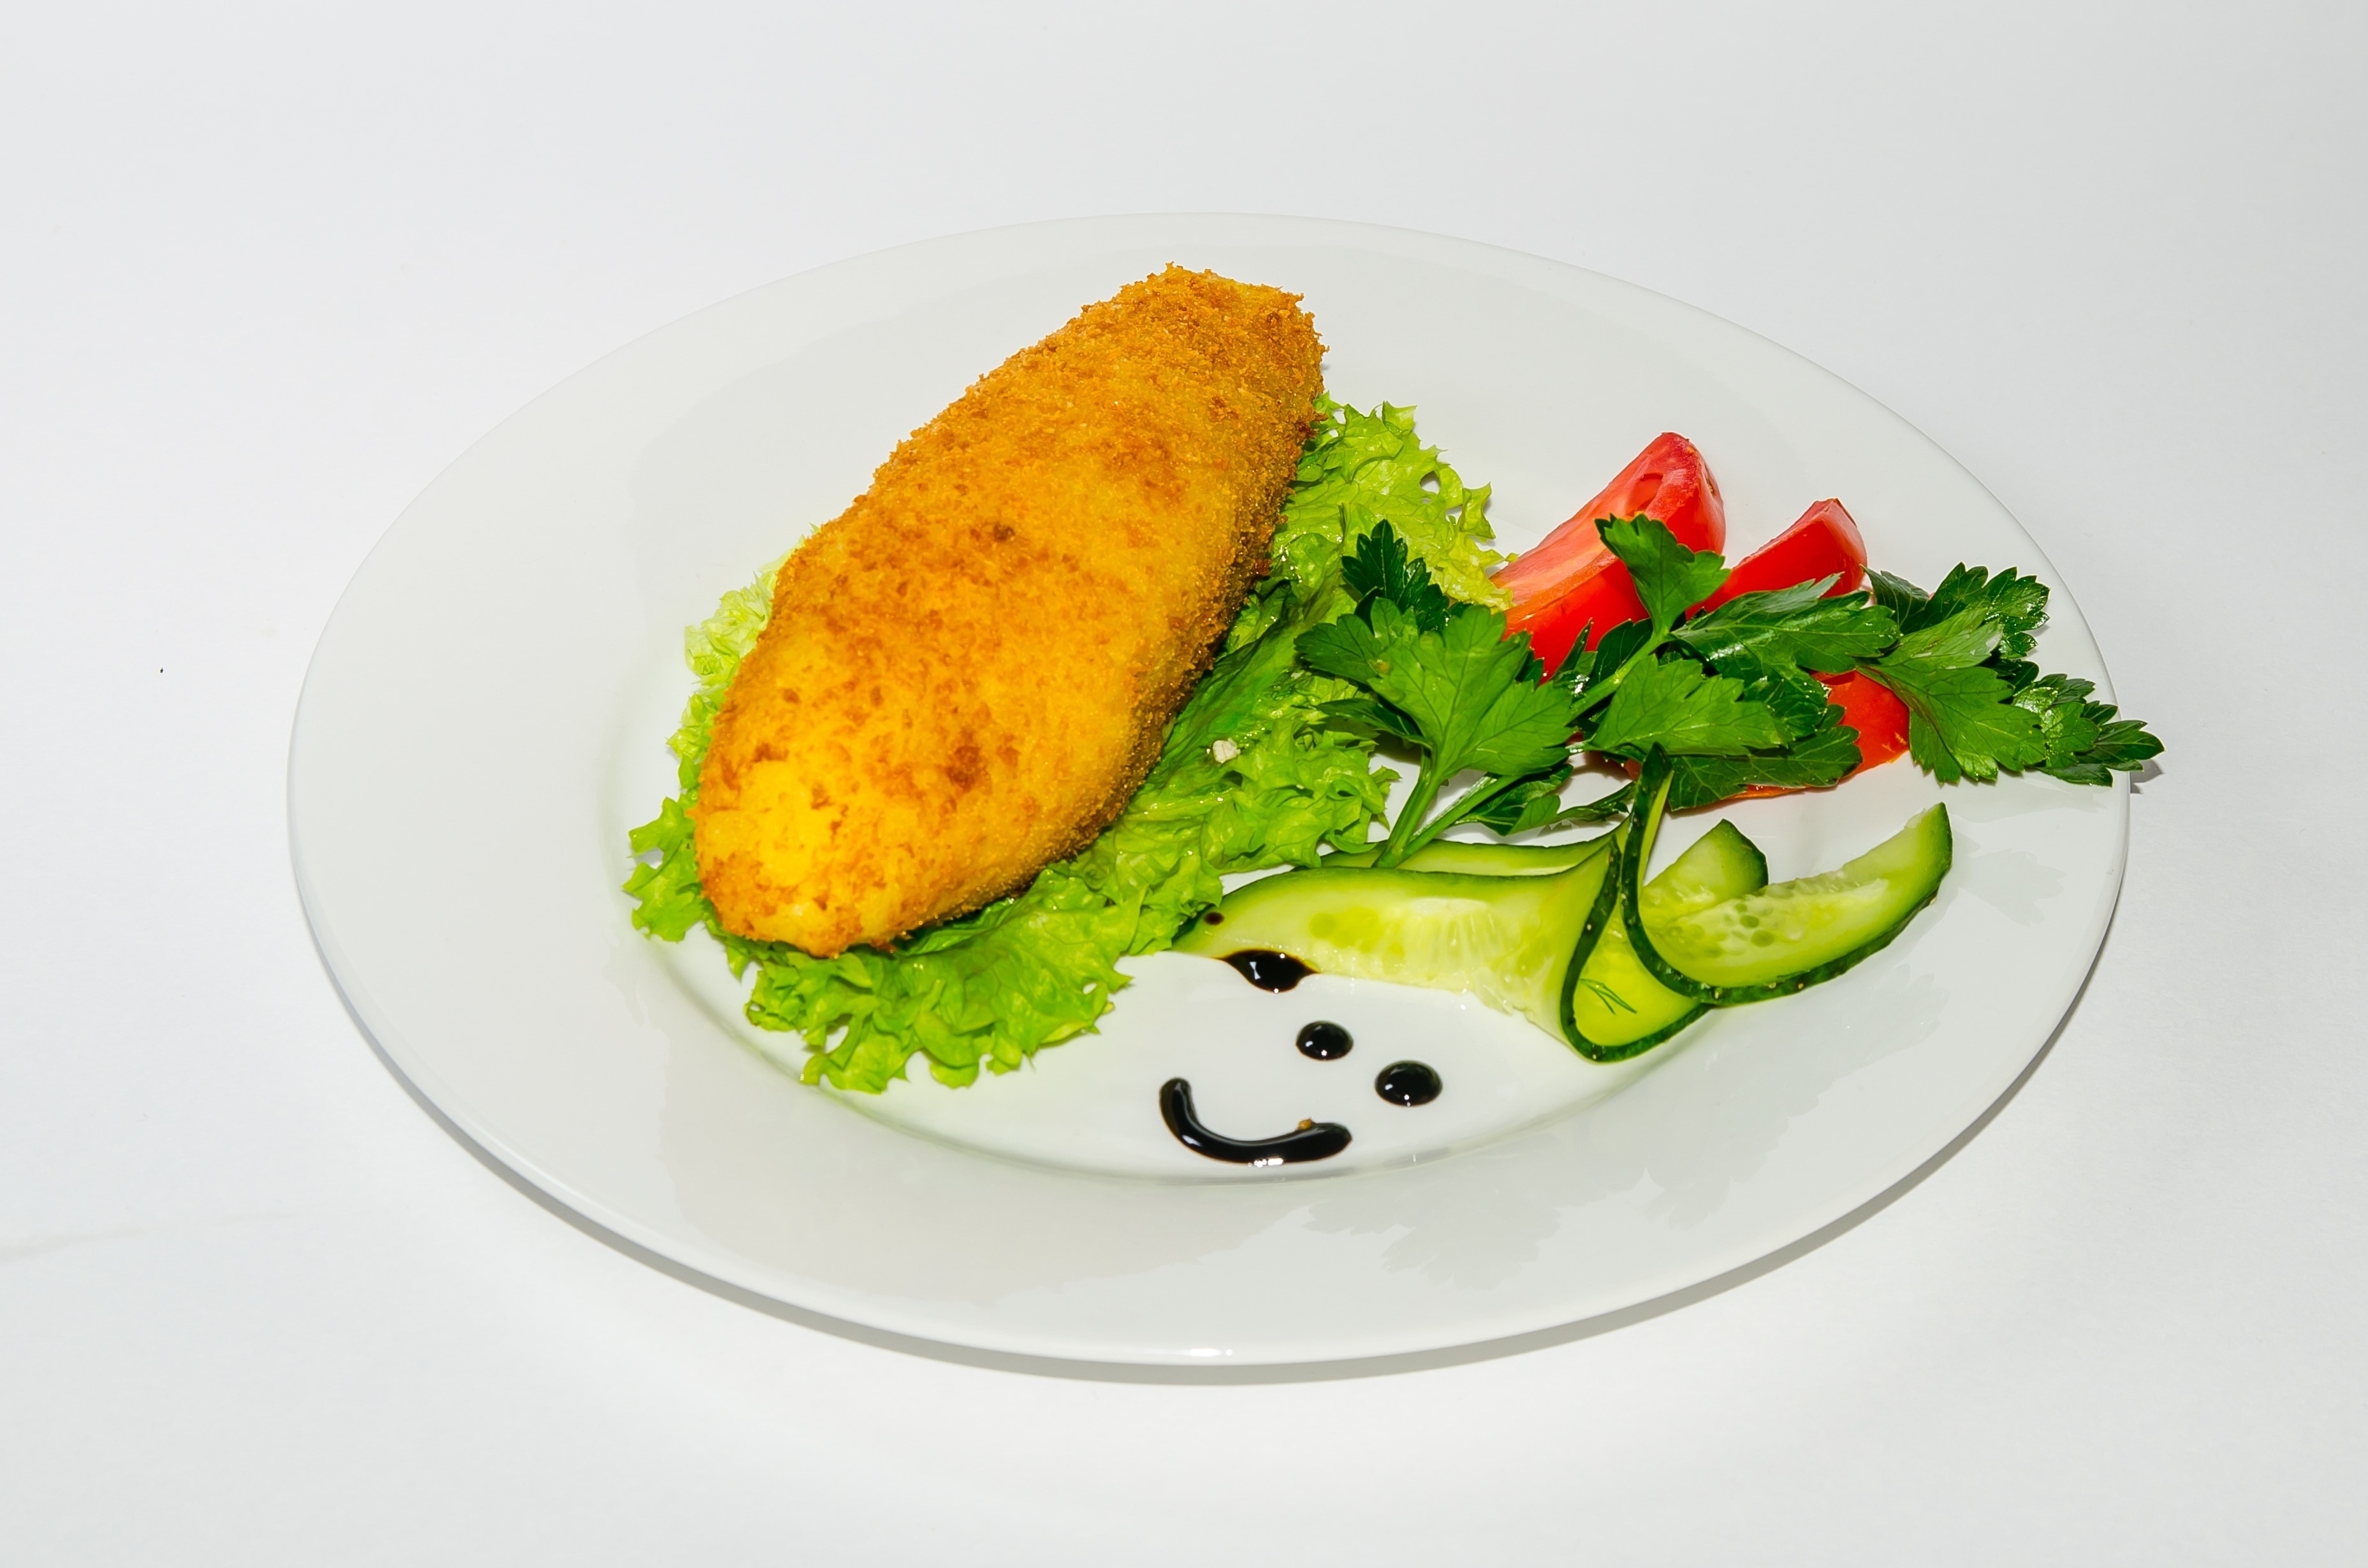 white ceramic plate serve with variety of vegetable with fried food